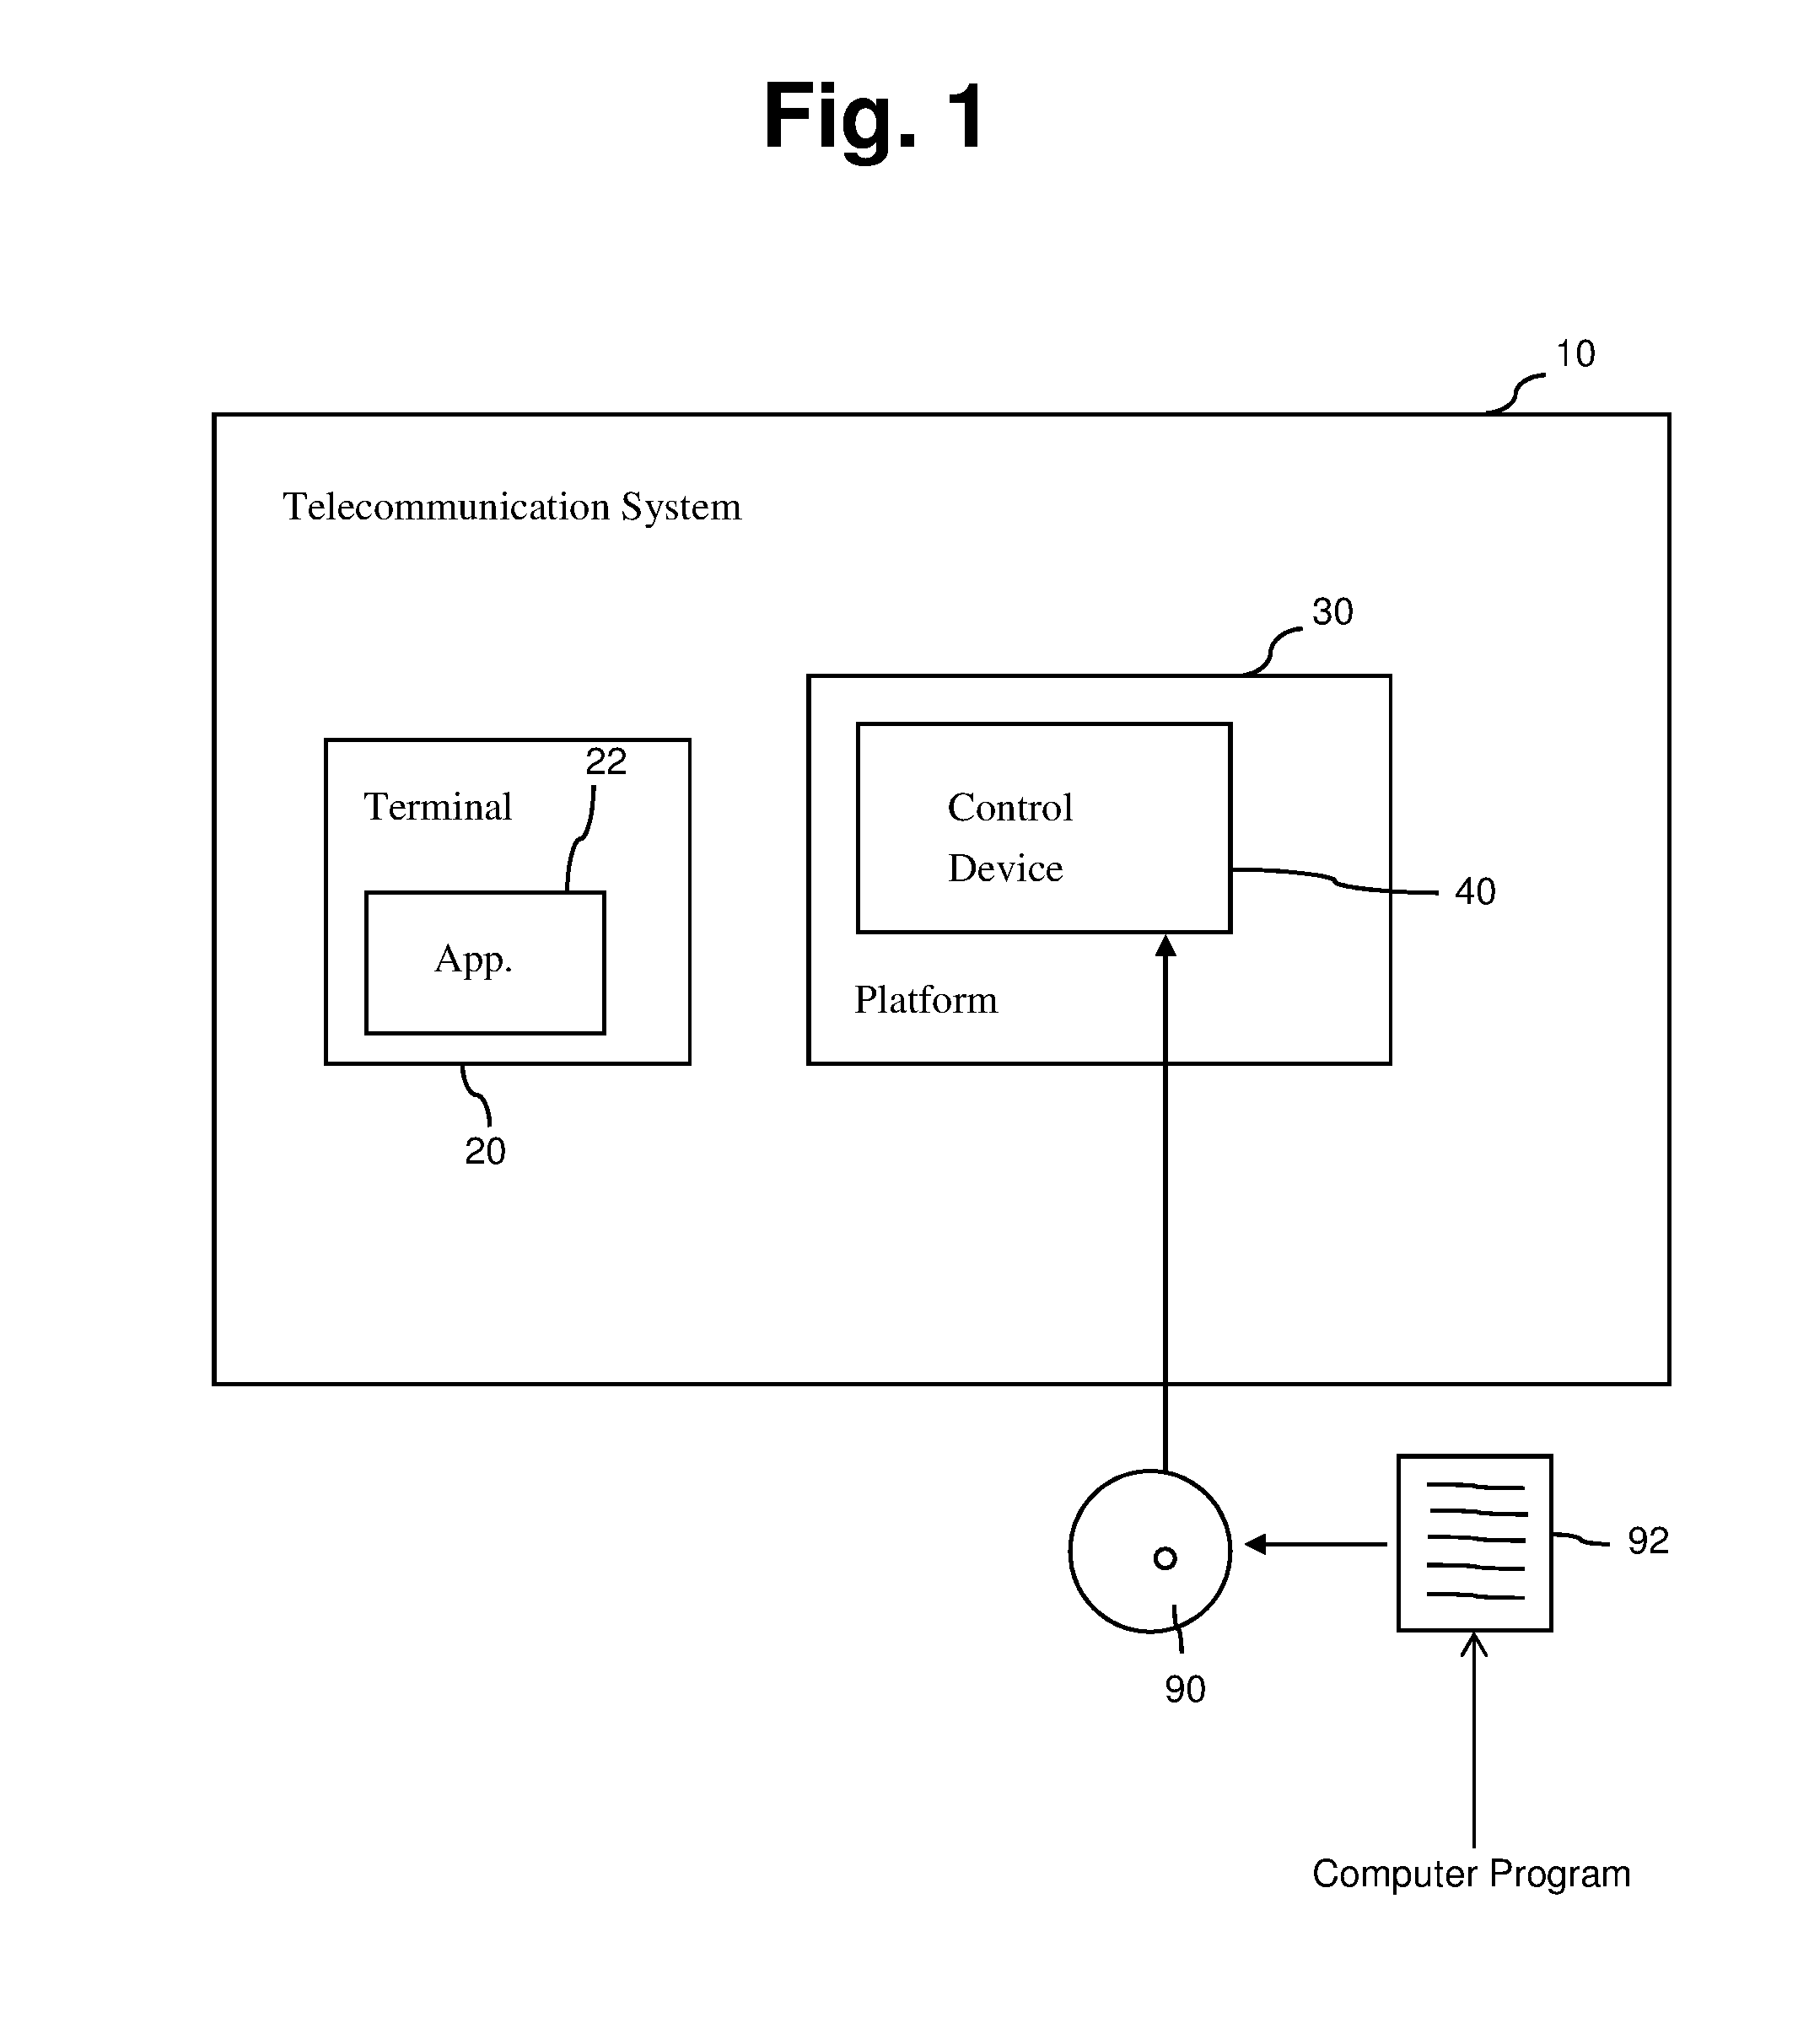 Telecommunication system and method for flexible control of the telecommunication system using a switching command issued by an application to a platform